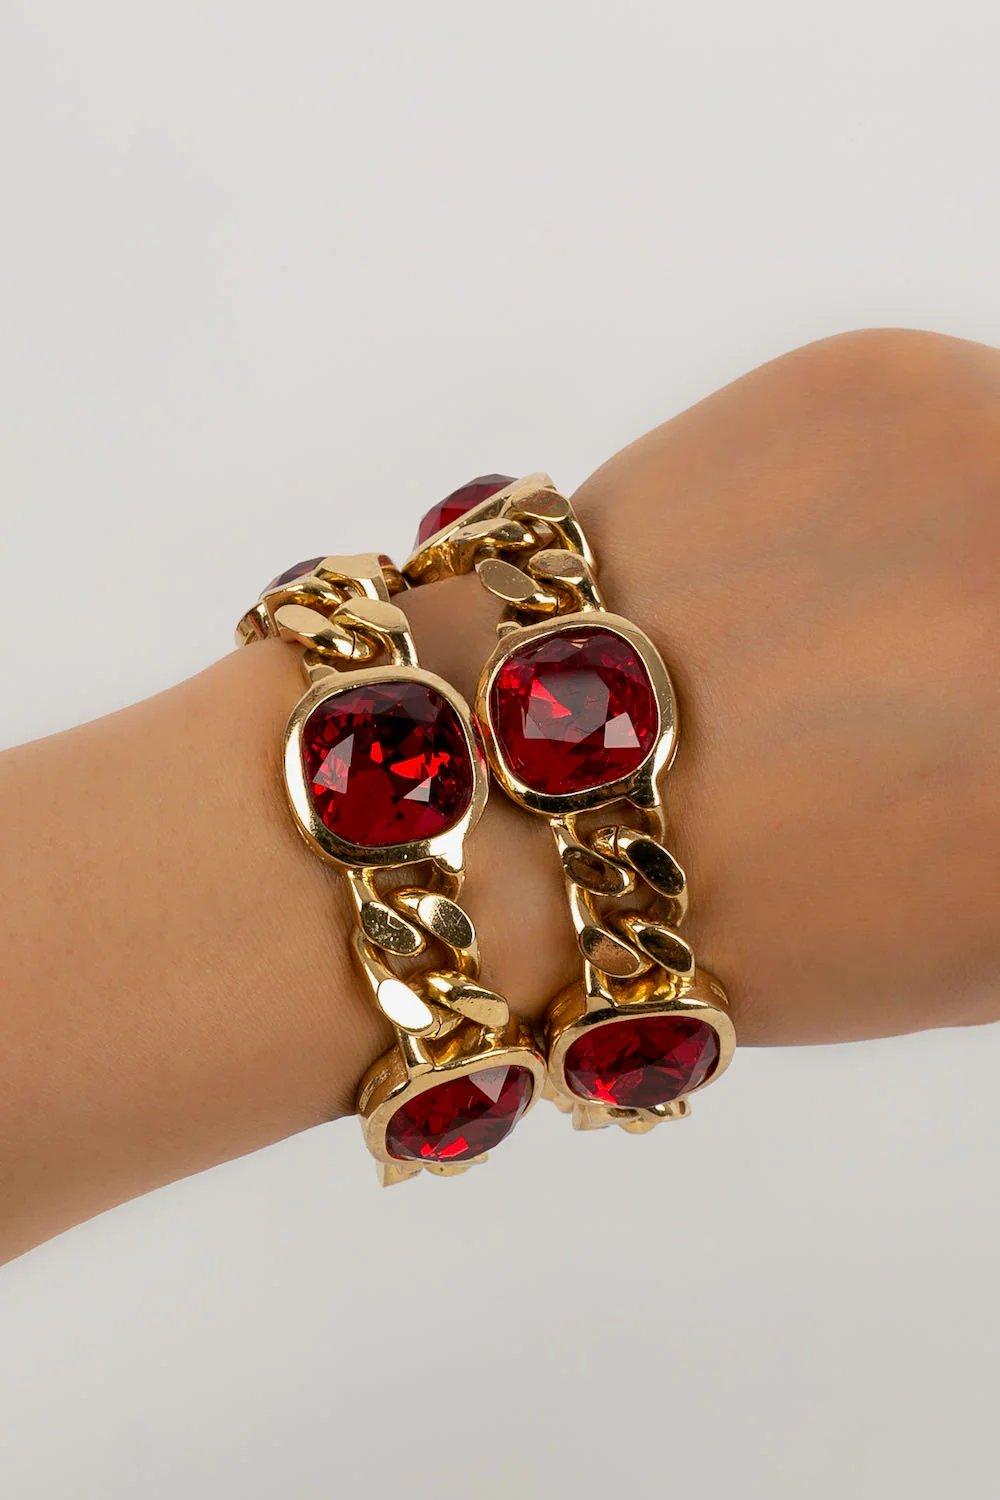 Christian Dior Golden Metal Bracelet with Red Rhinestones For Sale 2